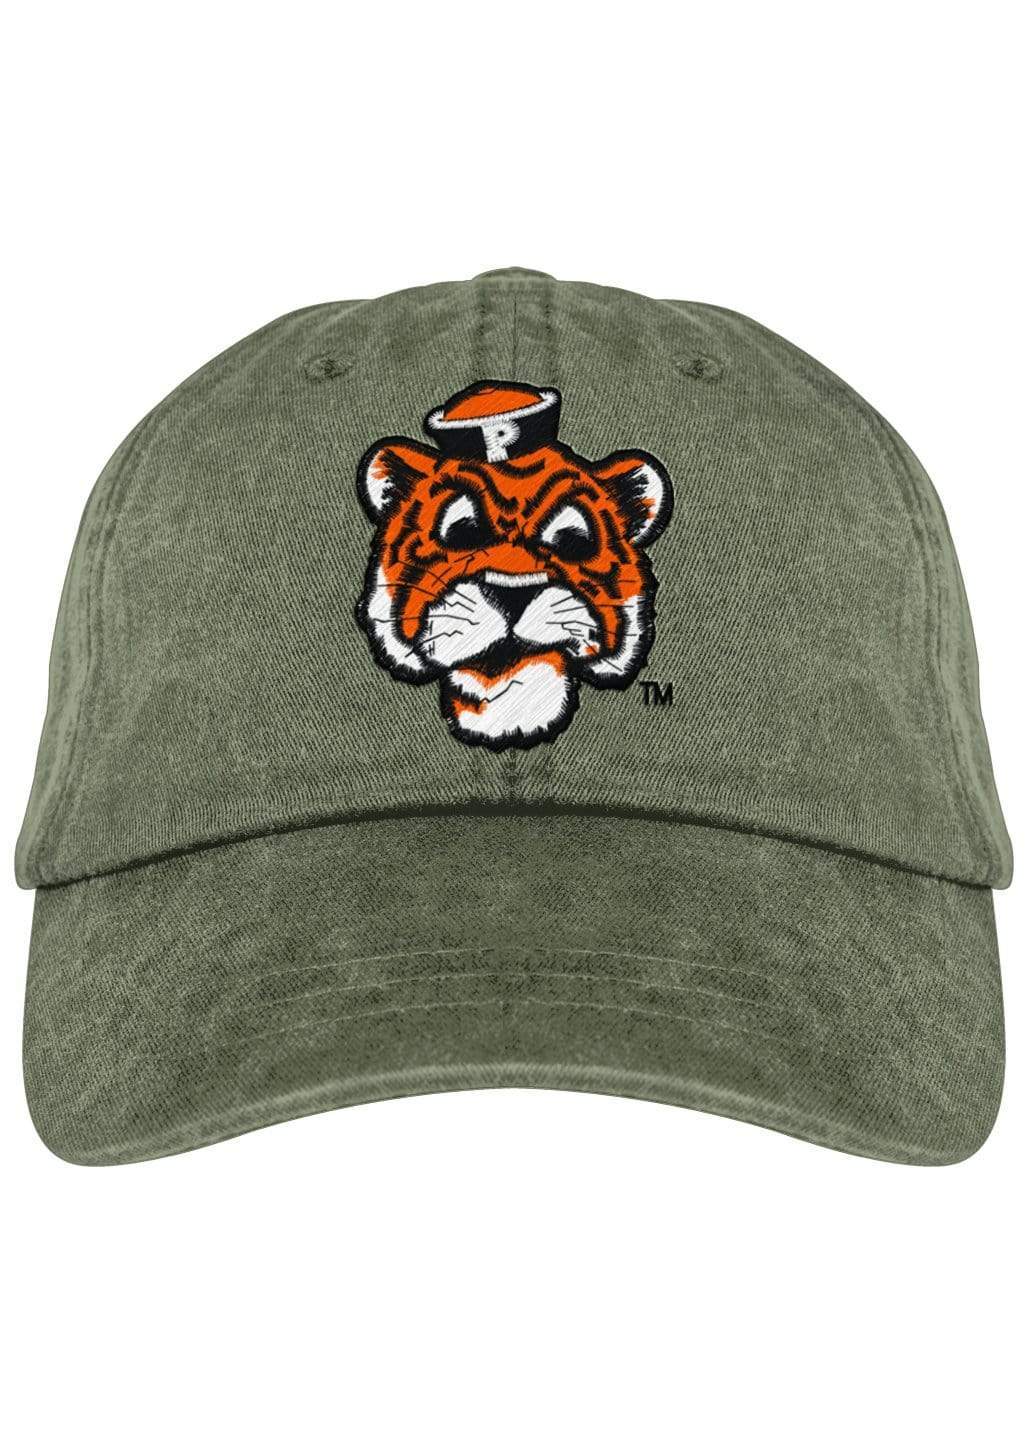 University of the Pacific Tigers Tommy Tiger Fadeaway Cap Hat by Zeus Collegiate